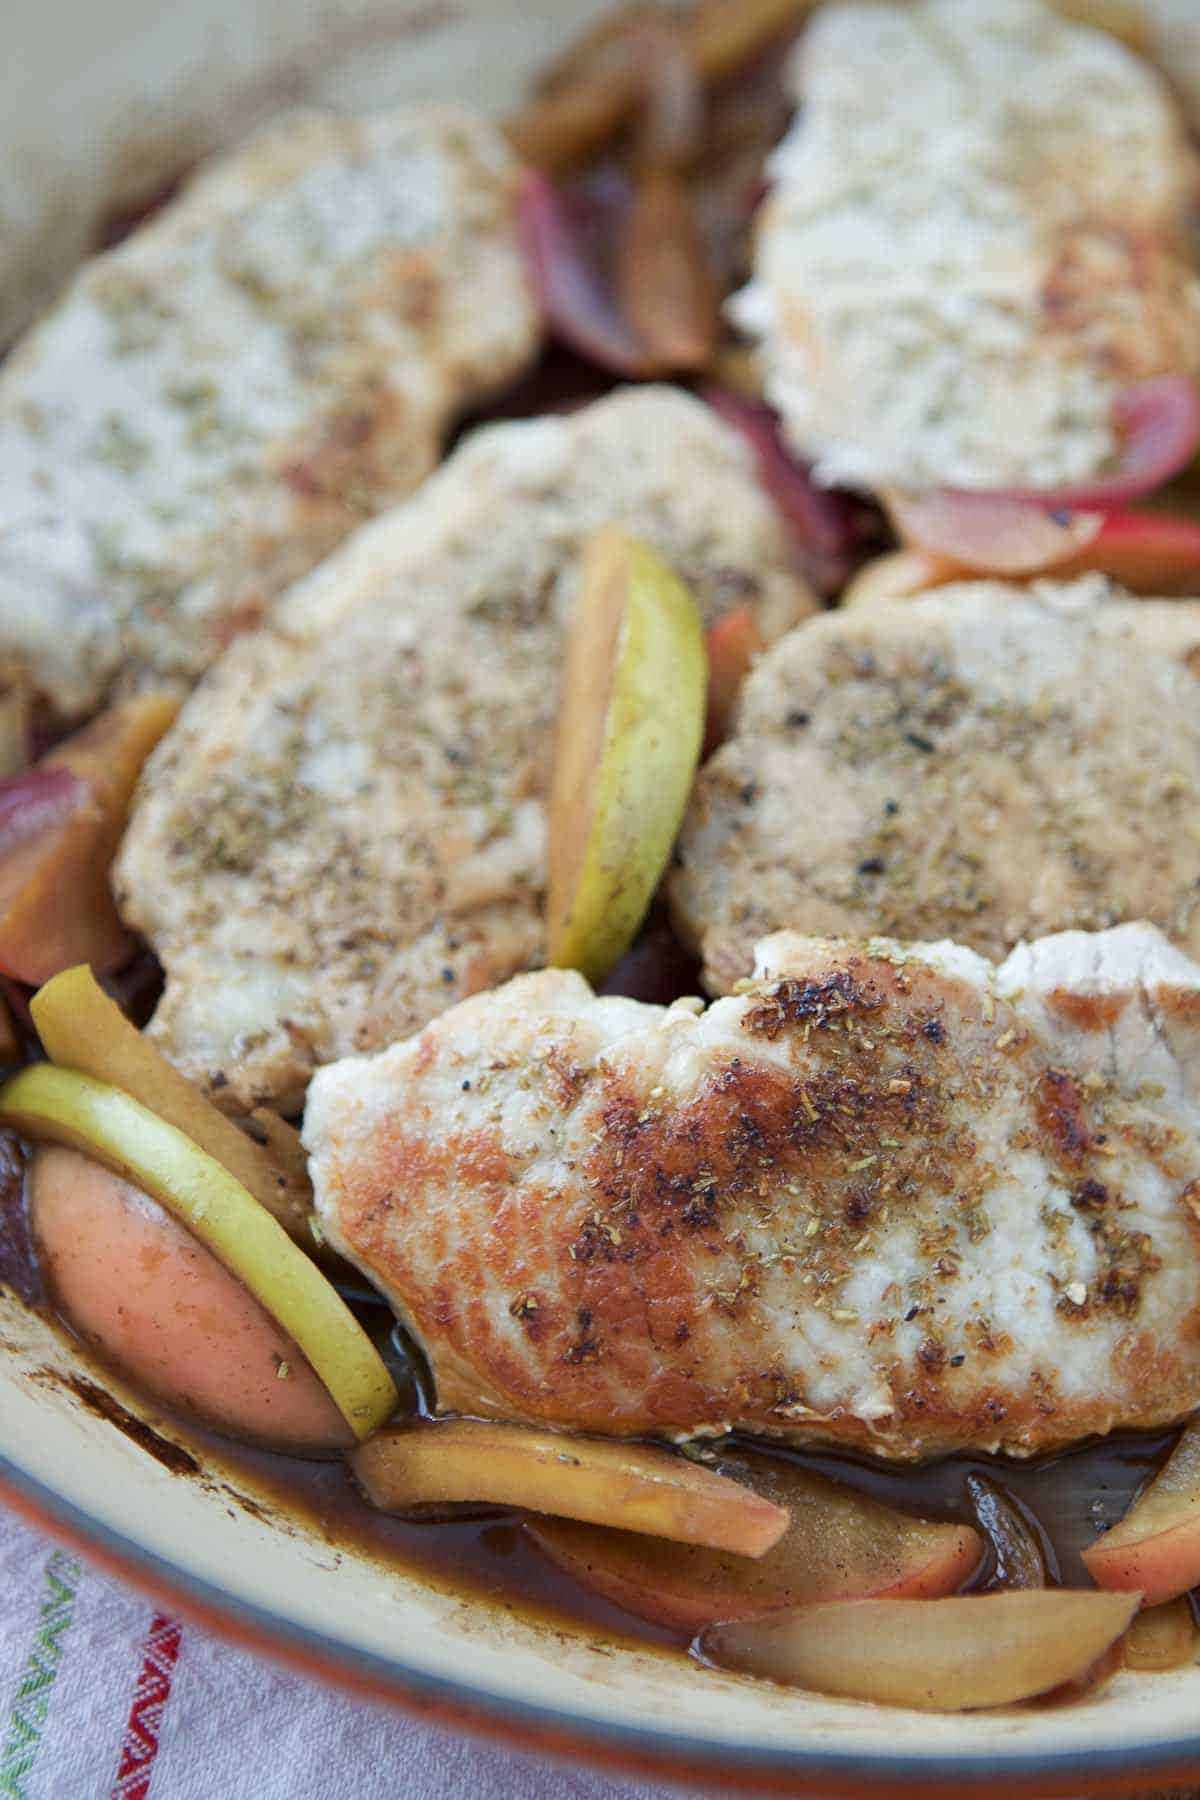 Hard Cider Skillet Pork Chops with Apples and Onions - Aggie's Kitchen